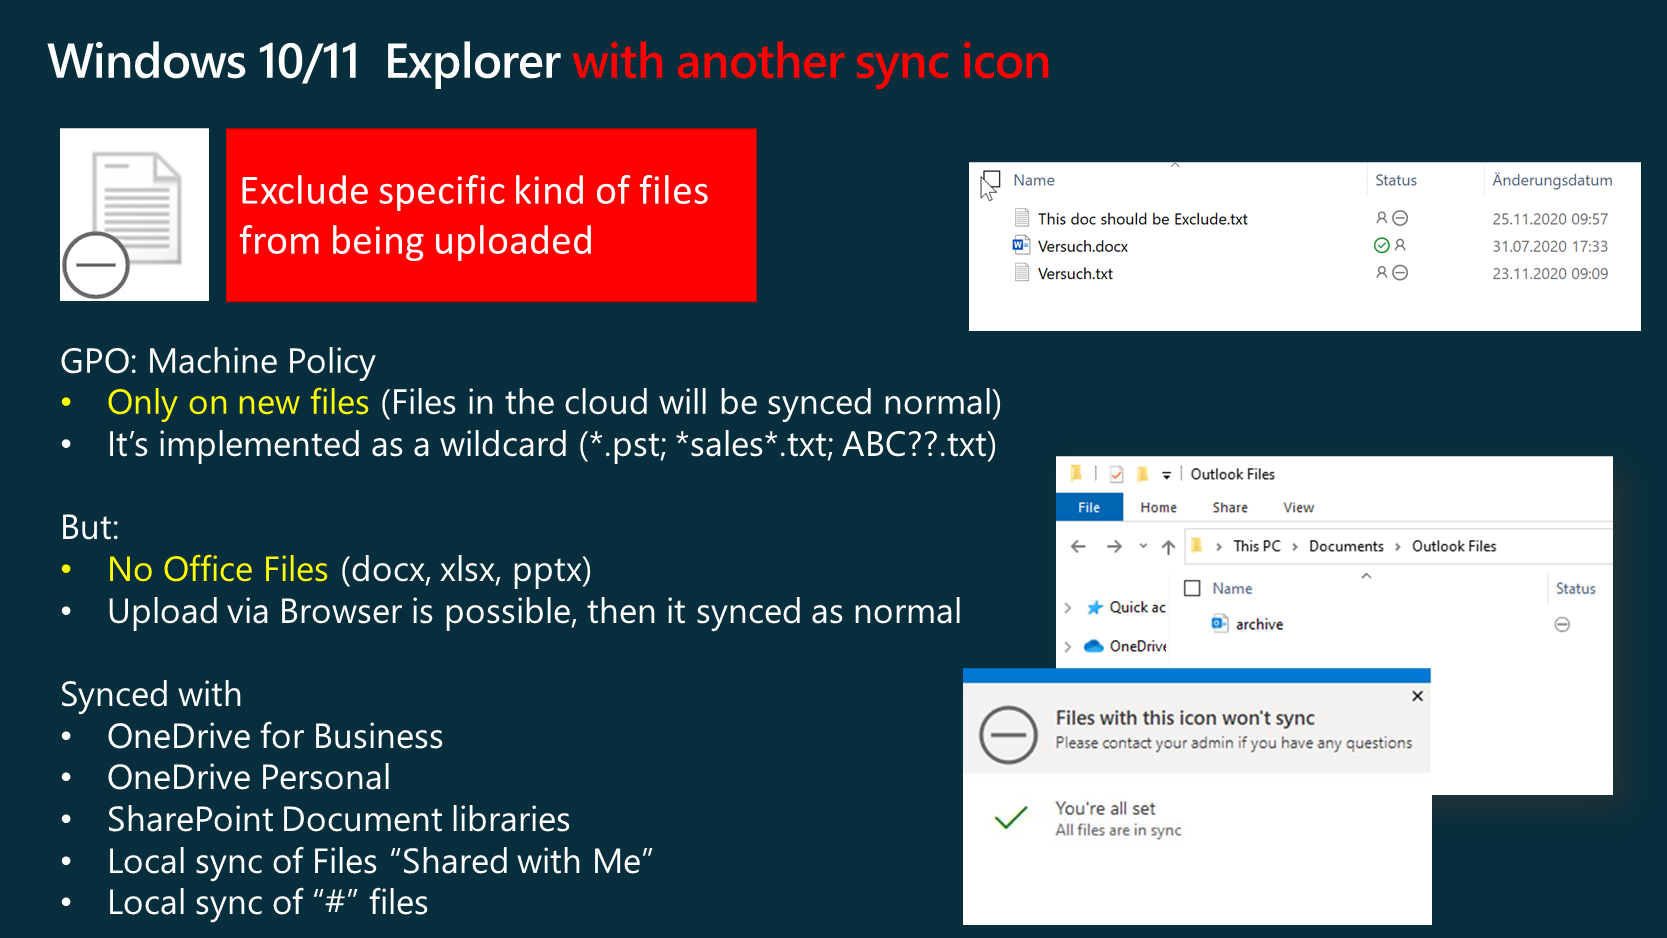 A slide image with text and screenshots shows some characteristics of the Computer Group Policy and special features. The slide describes how using a group policy, you could use wildcard characters to exclude some files from sync to the cloud.